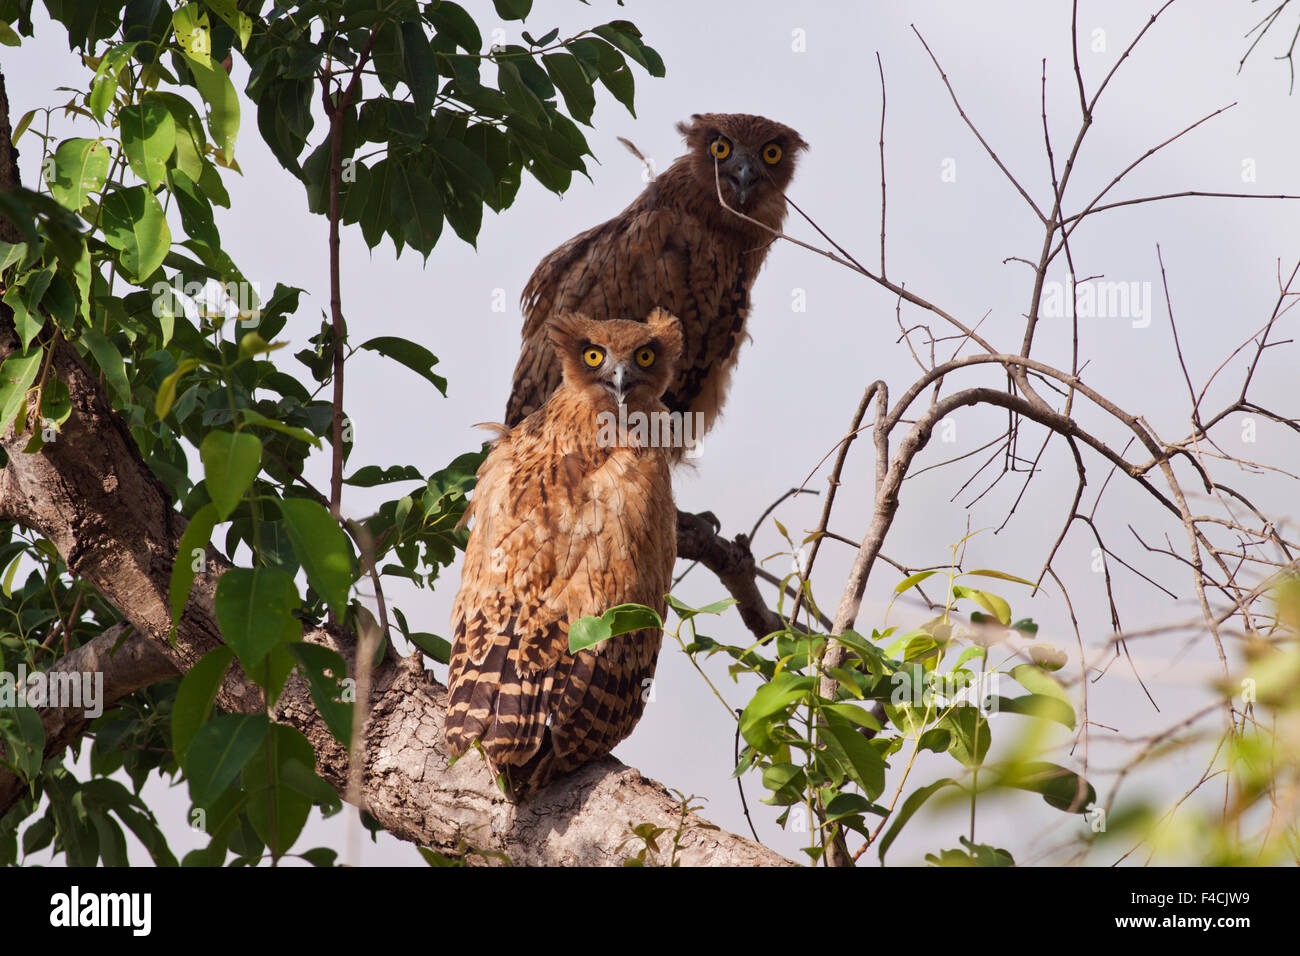 Young ones of Brown Fish Owl, Corbett National Park, India. Stock Photo